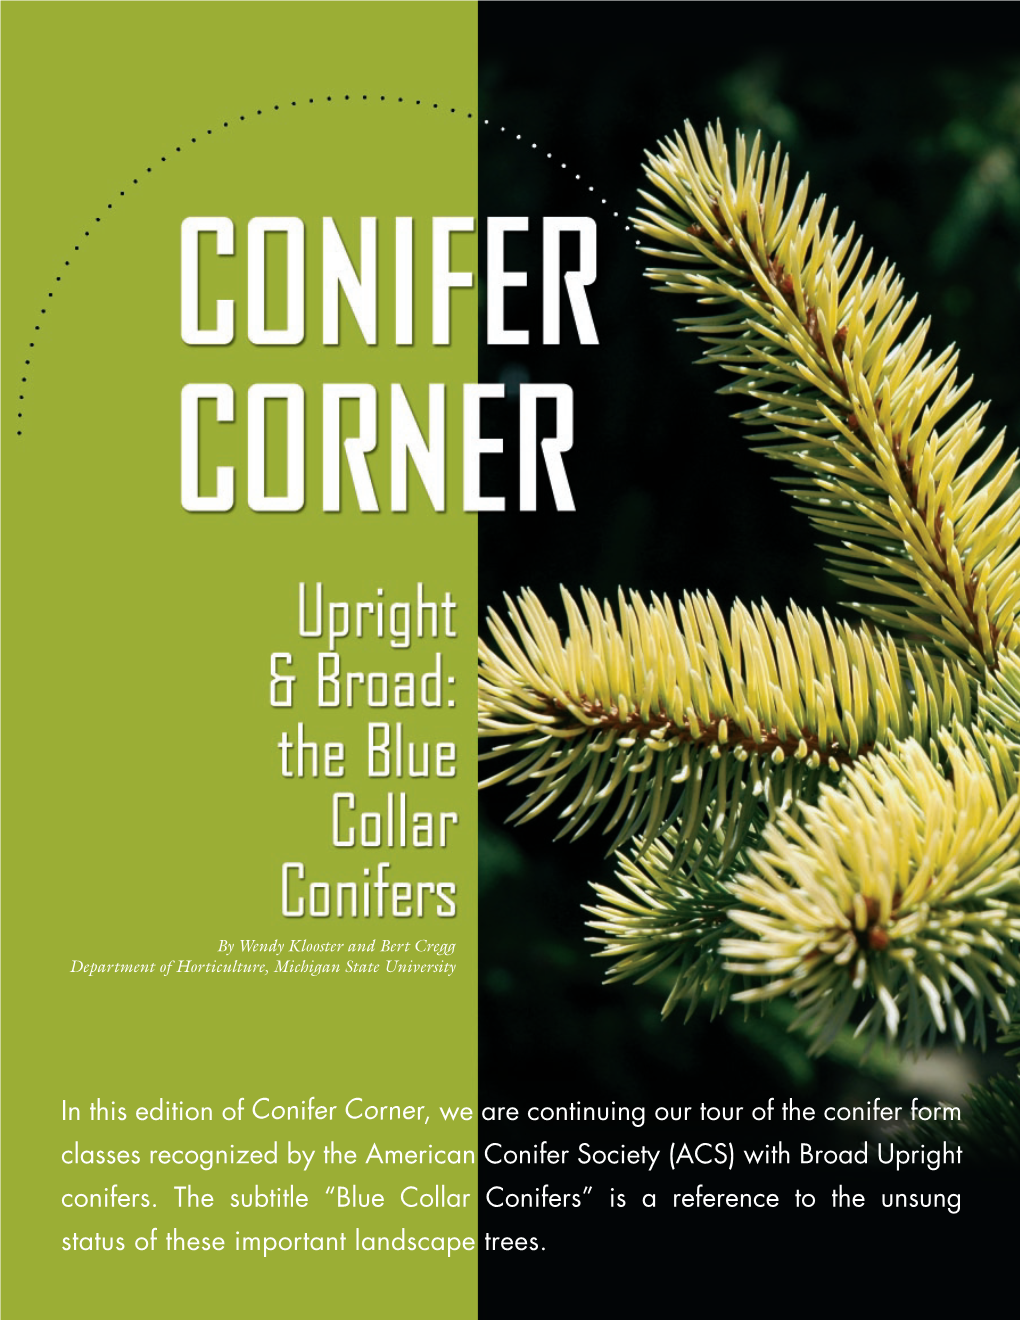 In This Edition of Conifer Corner, We Are Continuing Our Tour of the Conifer Form Classes Recognized by the American Conifer Society (ACS) with Broad Upright Conifers